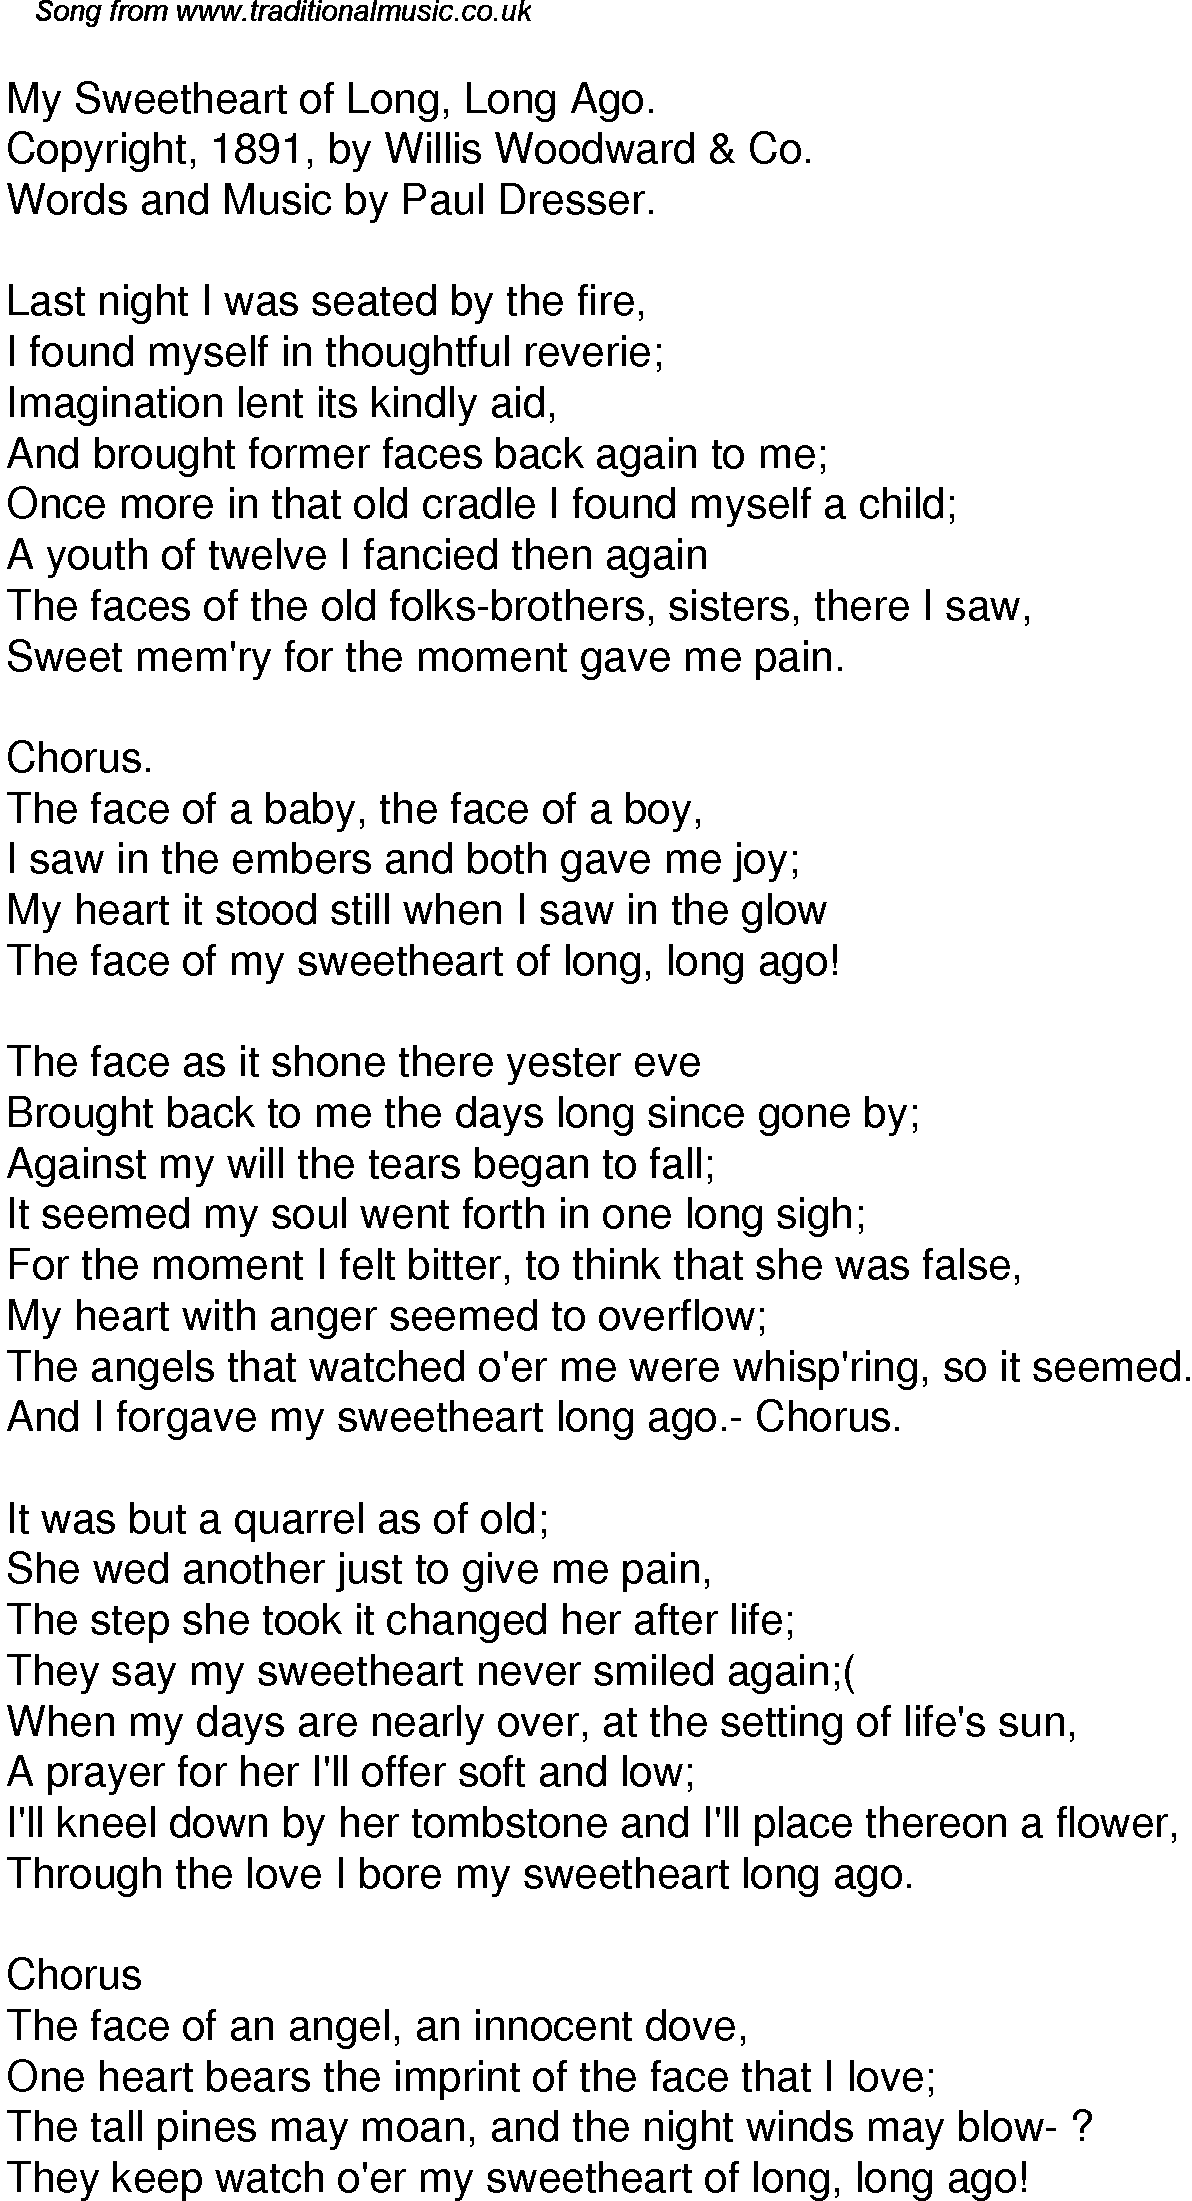 Old Time Song Lyrics For 35 My Sweetheart Of Long Long Ago